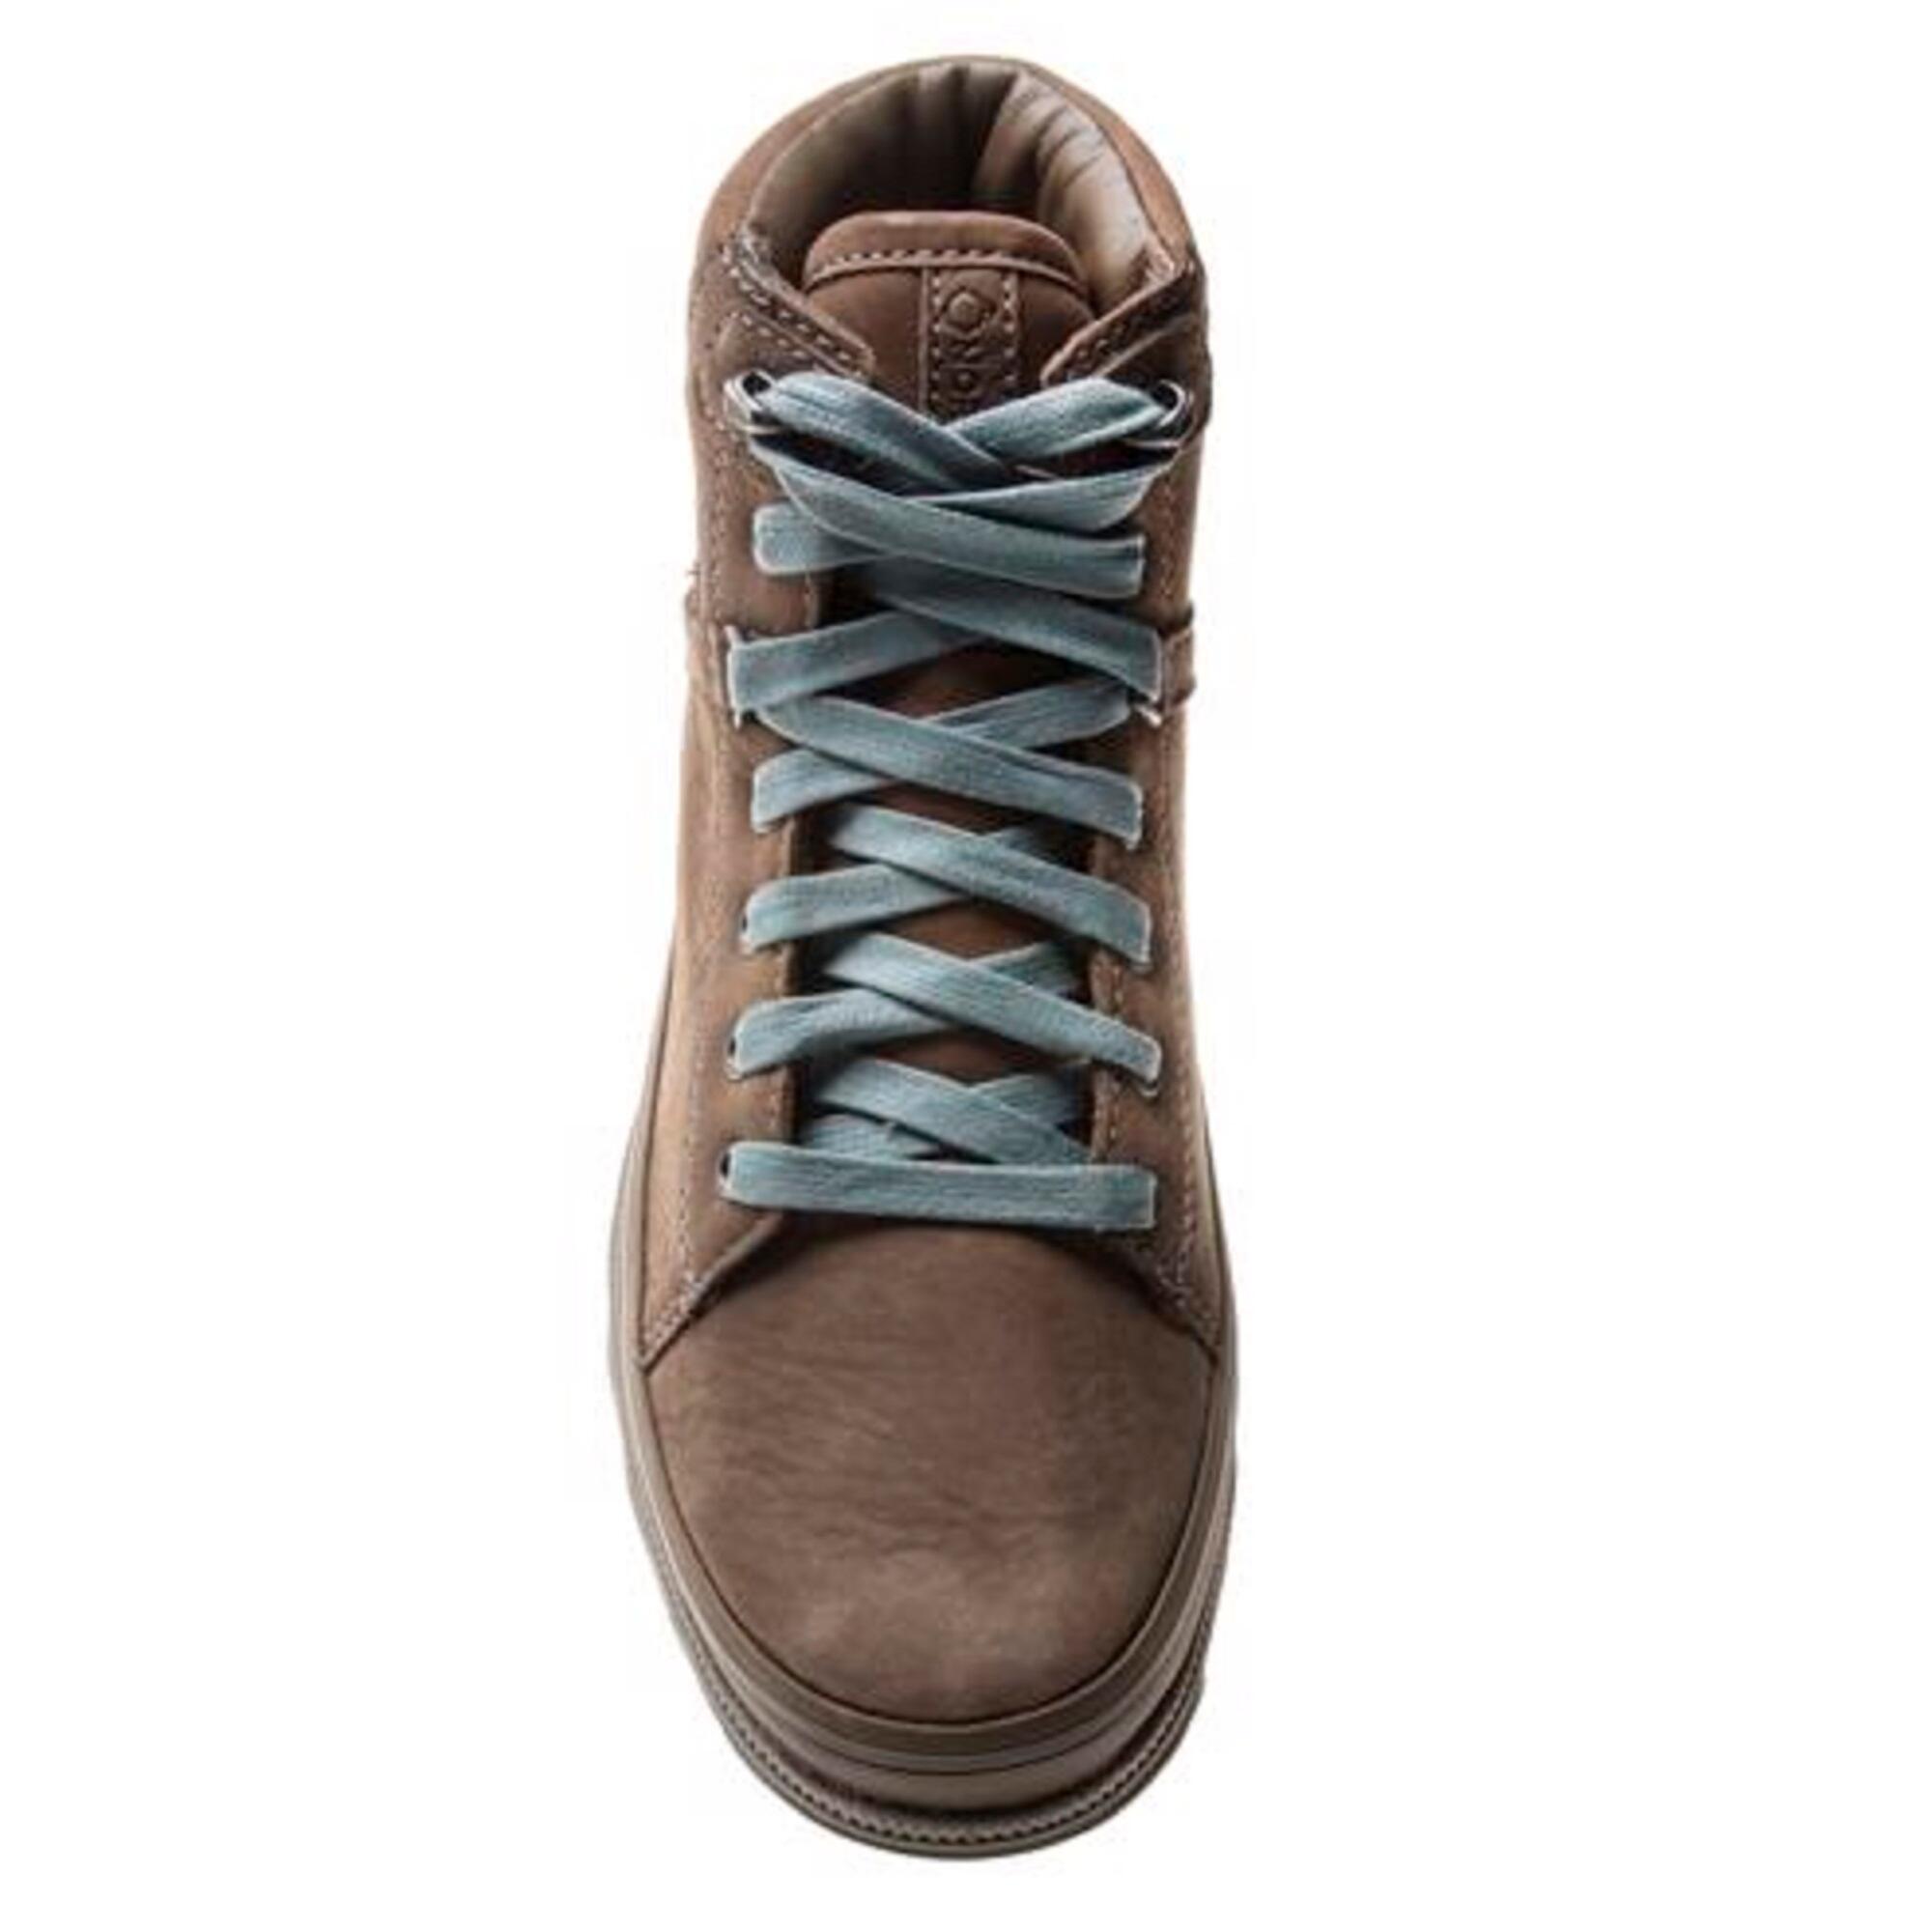 Women's walking boots - Northcape Shale - brown 5/5